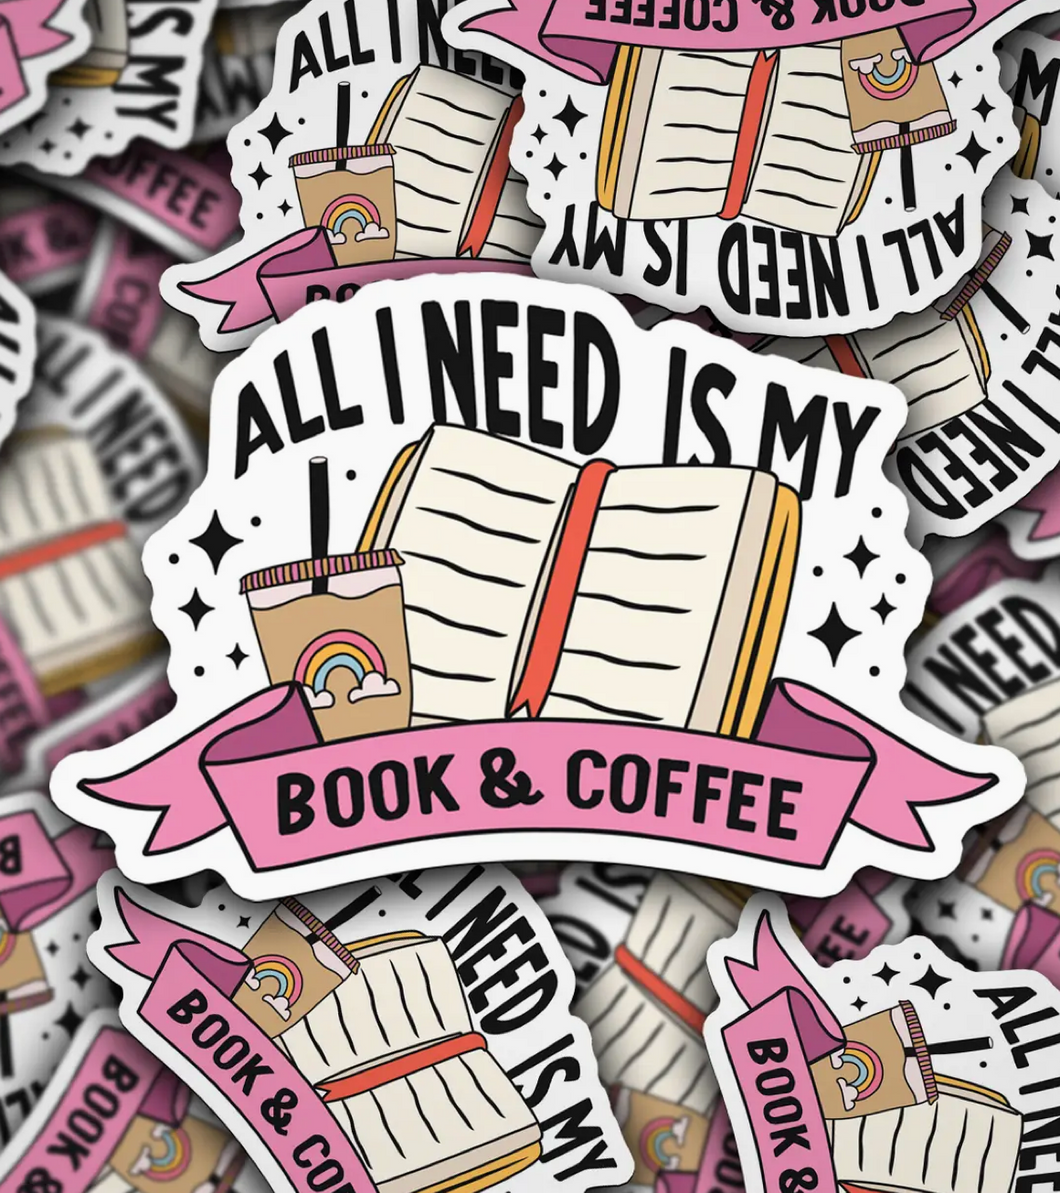 All I Need is My Book & Coffee Sticker